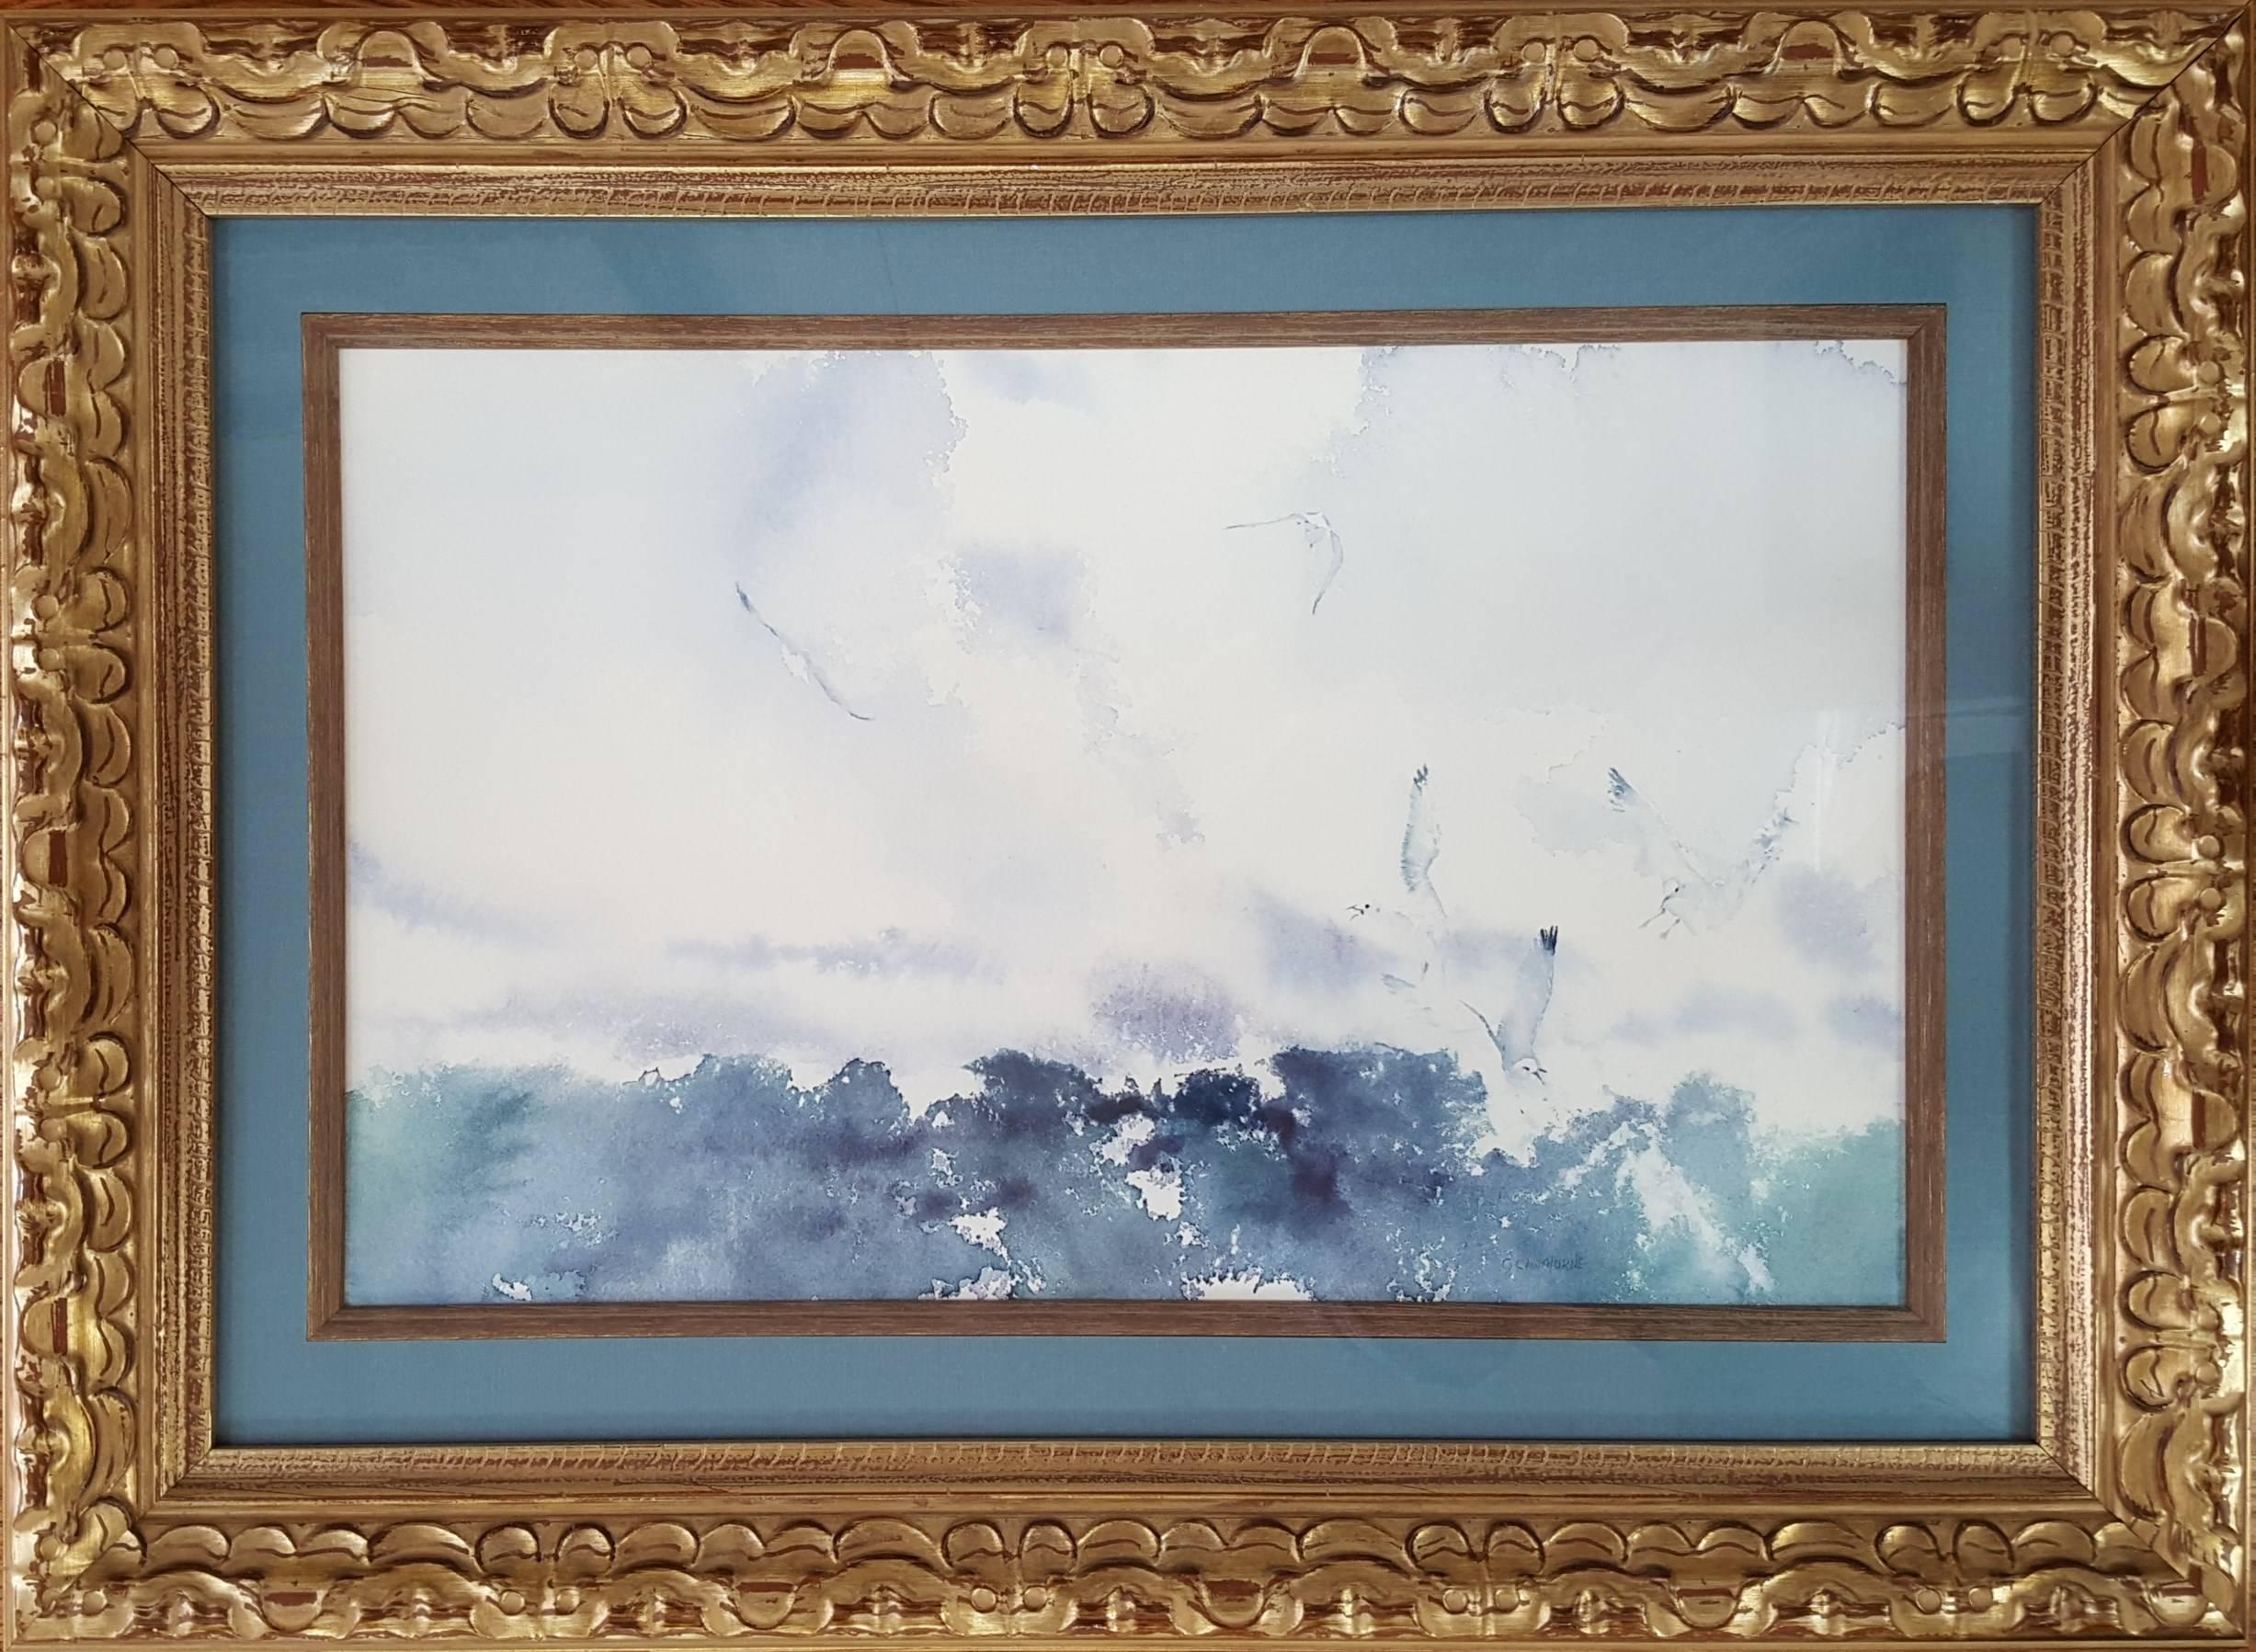 Flight of the Seagulls, Fully Framed. - Painting by Gillie Cawthorne